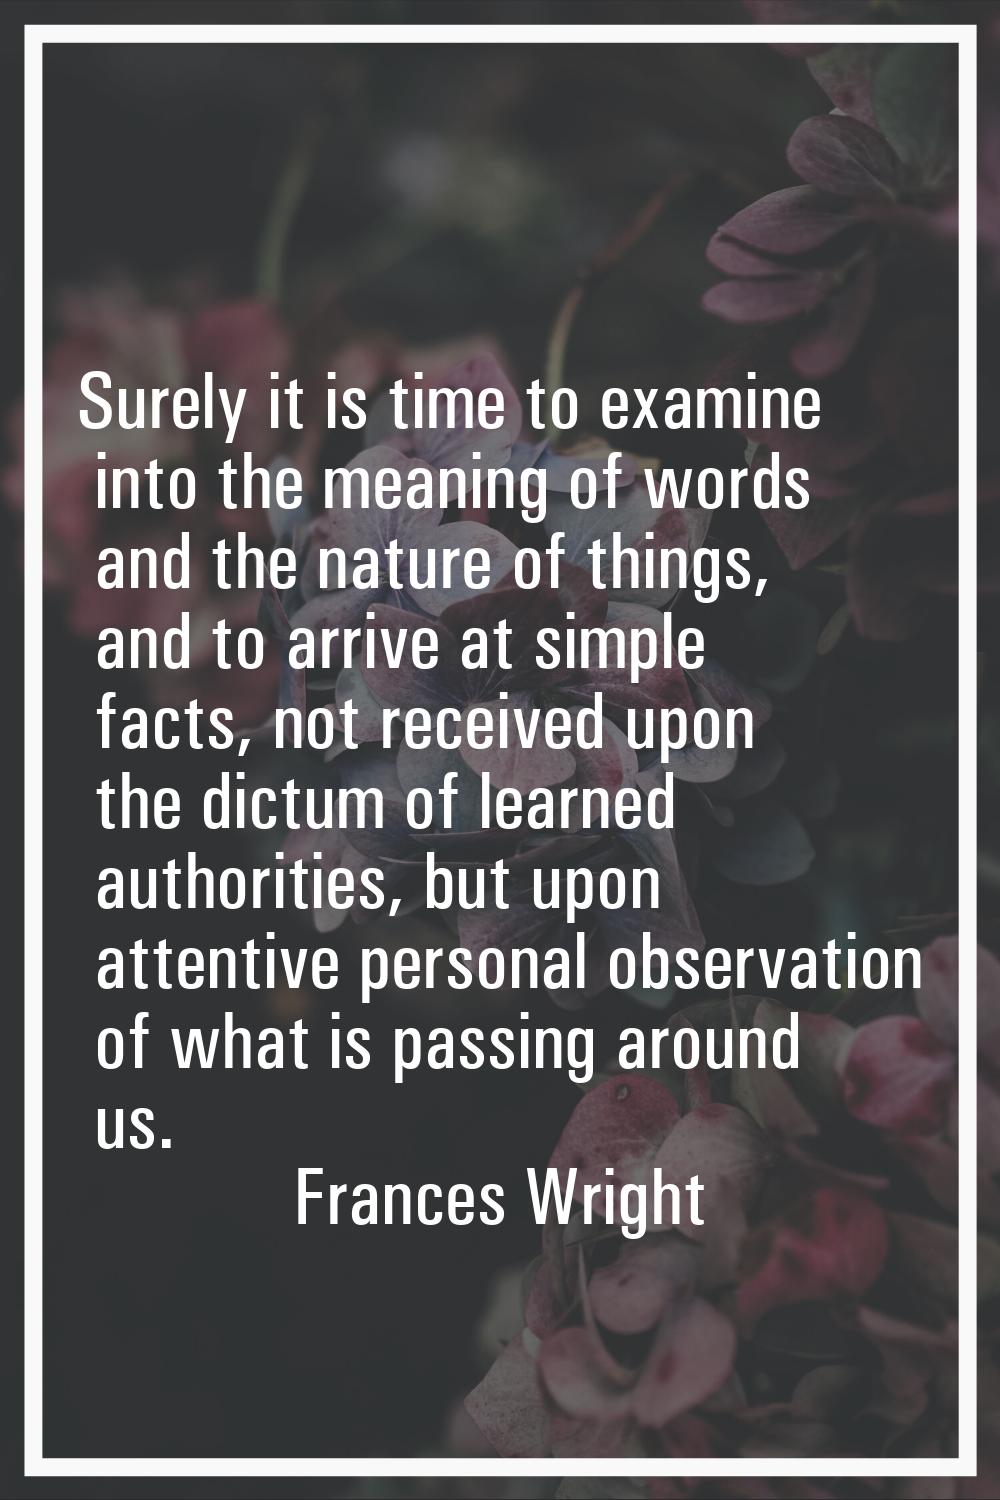 Surely it is time to examine into the meaning of words and the nature of things, and to arrive at s